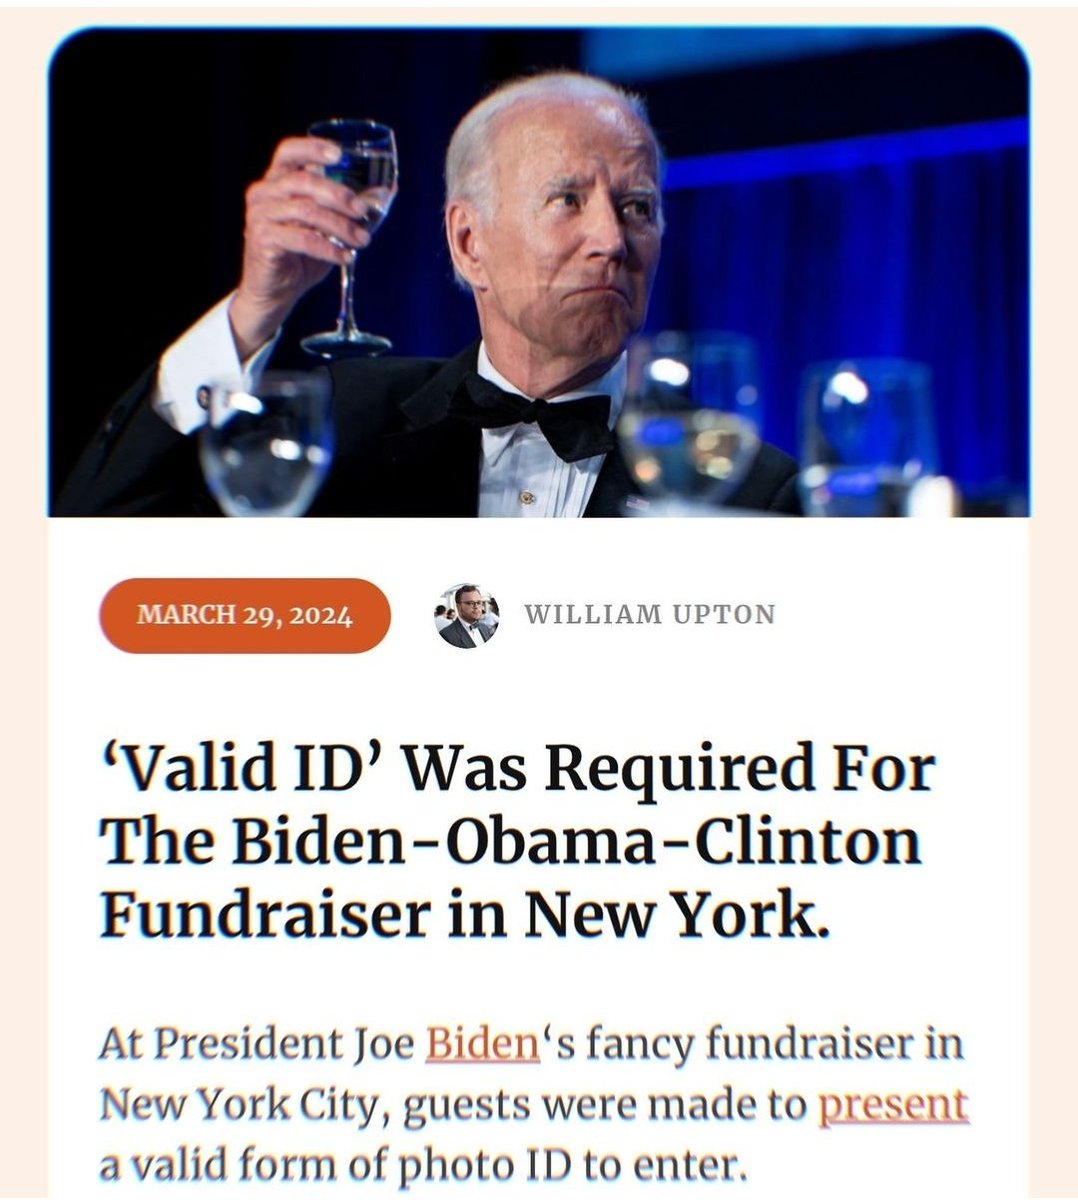 A valid ID was required to attend the Biden fundraiser with Clinton and Obama...

But they don't want valid IDs for voting...